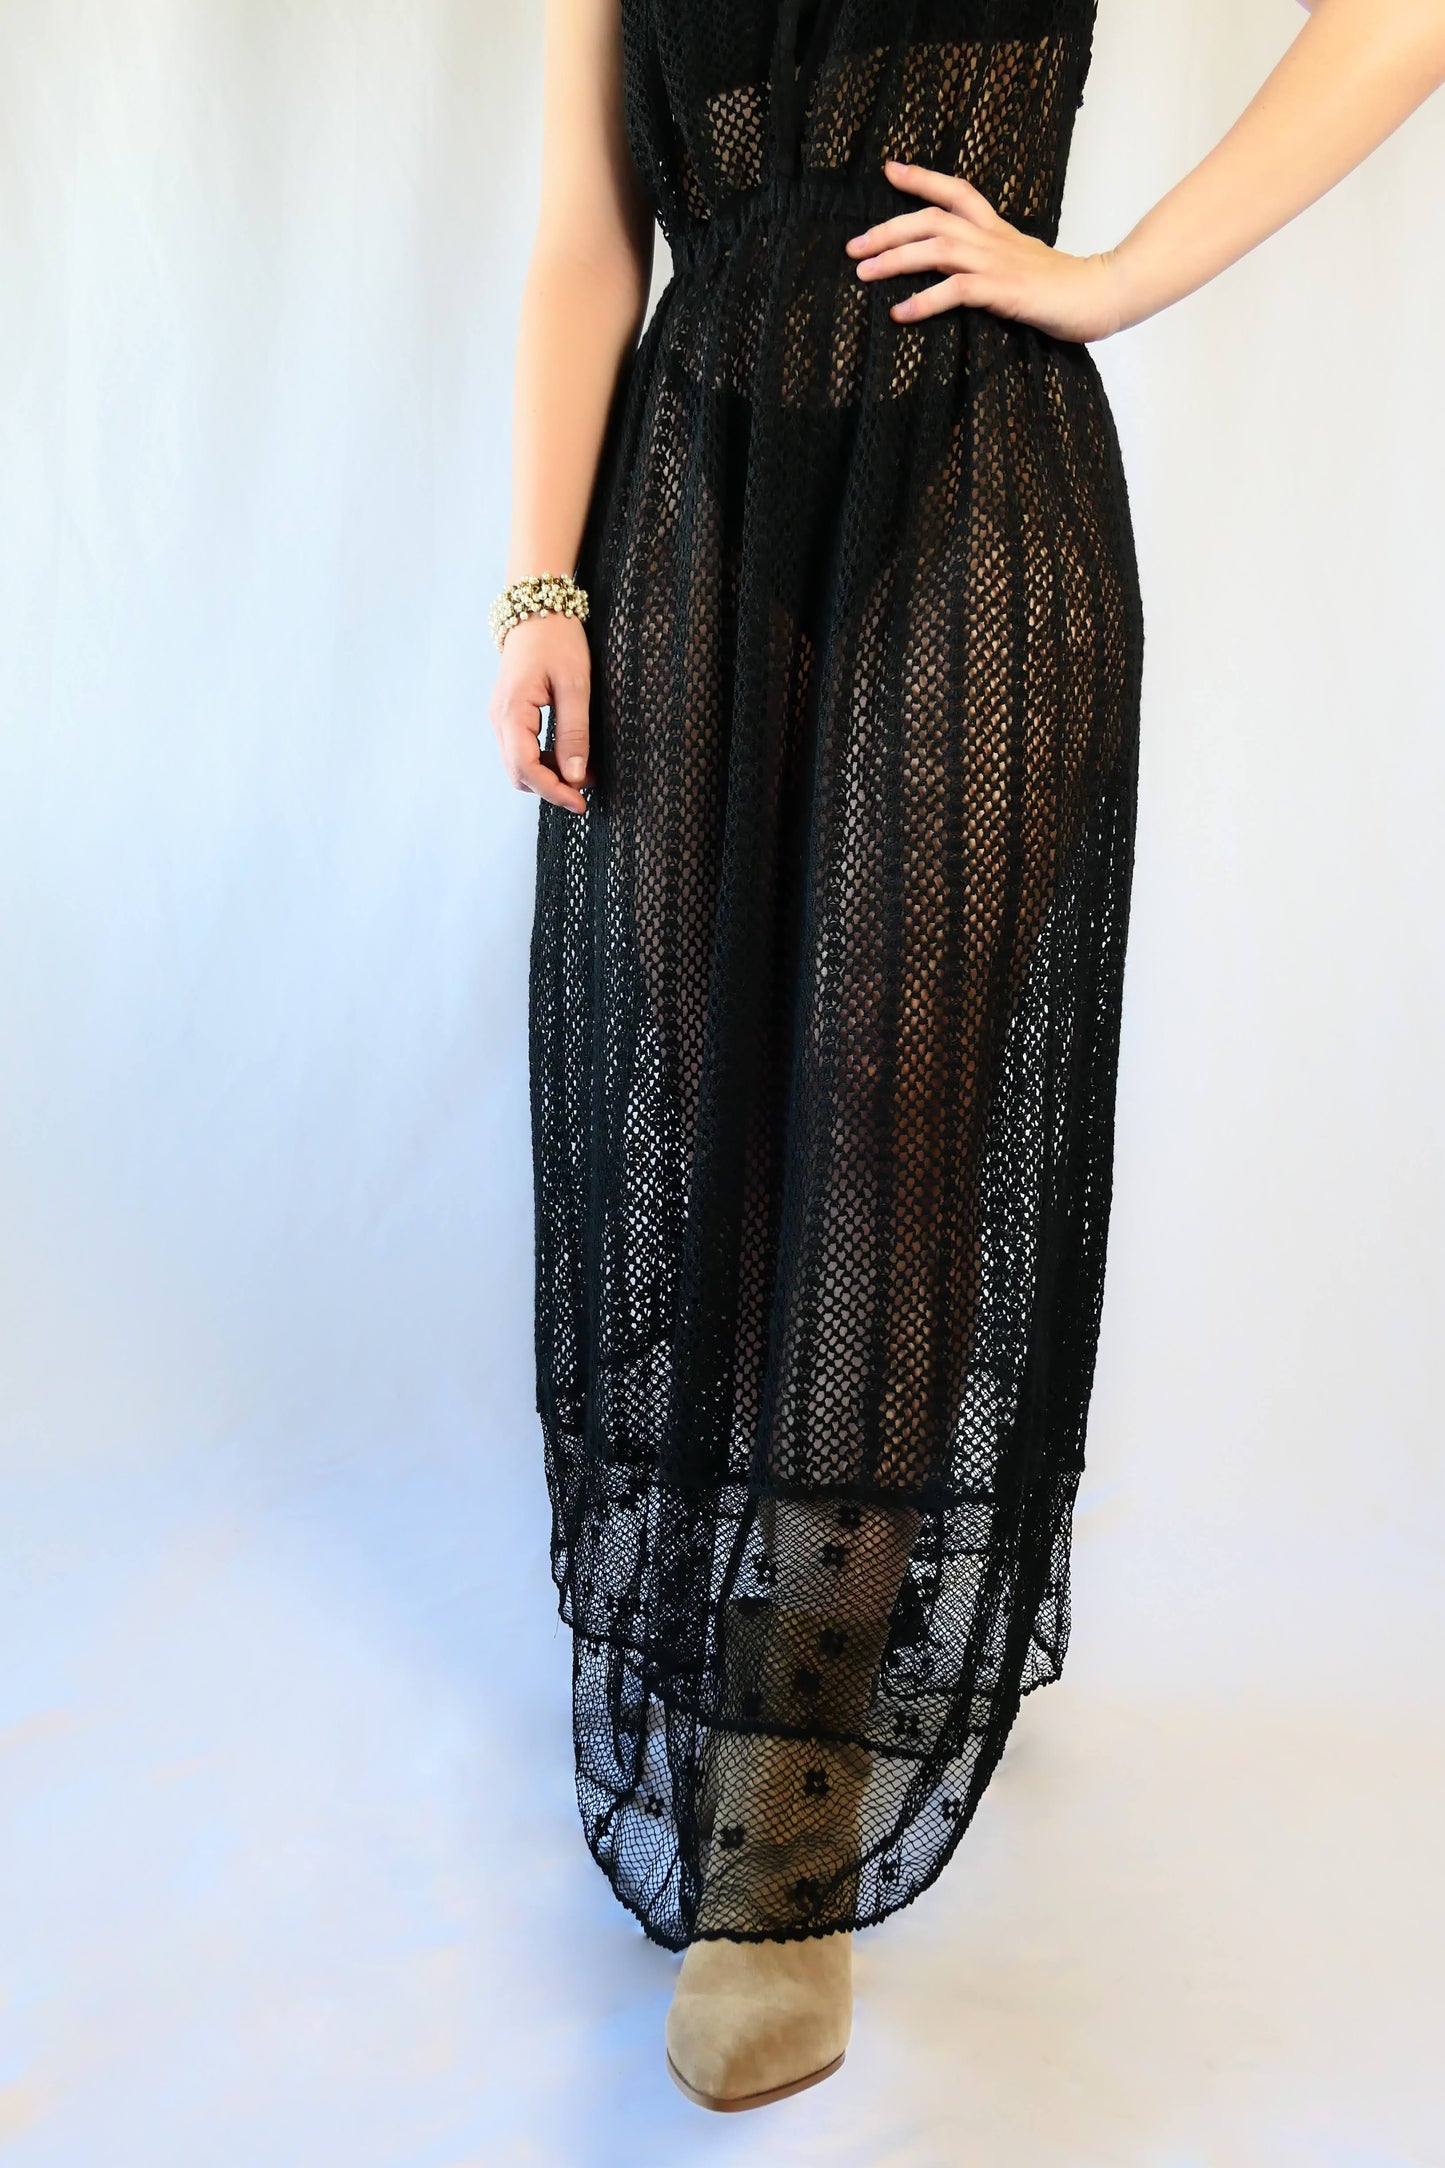 This boho chic dress in black is completely hand crocheted with soft cotton threads, with a Lim’s classic delicate net patterned crochet at the bottom hem.   The dress is worn with the button open at the front for a flattering V-neckline.  